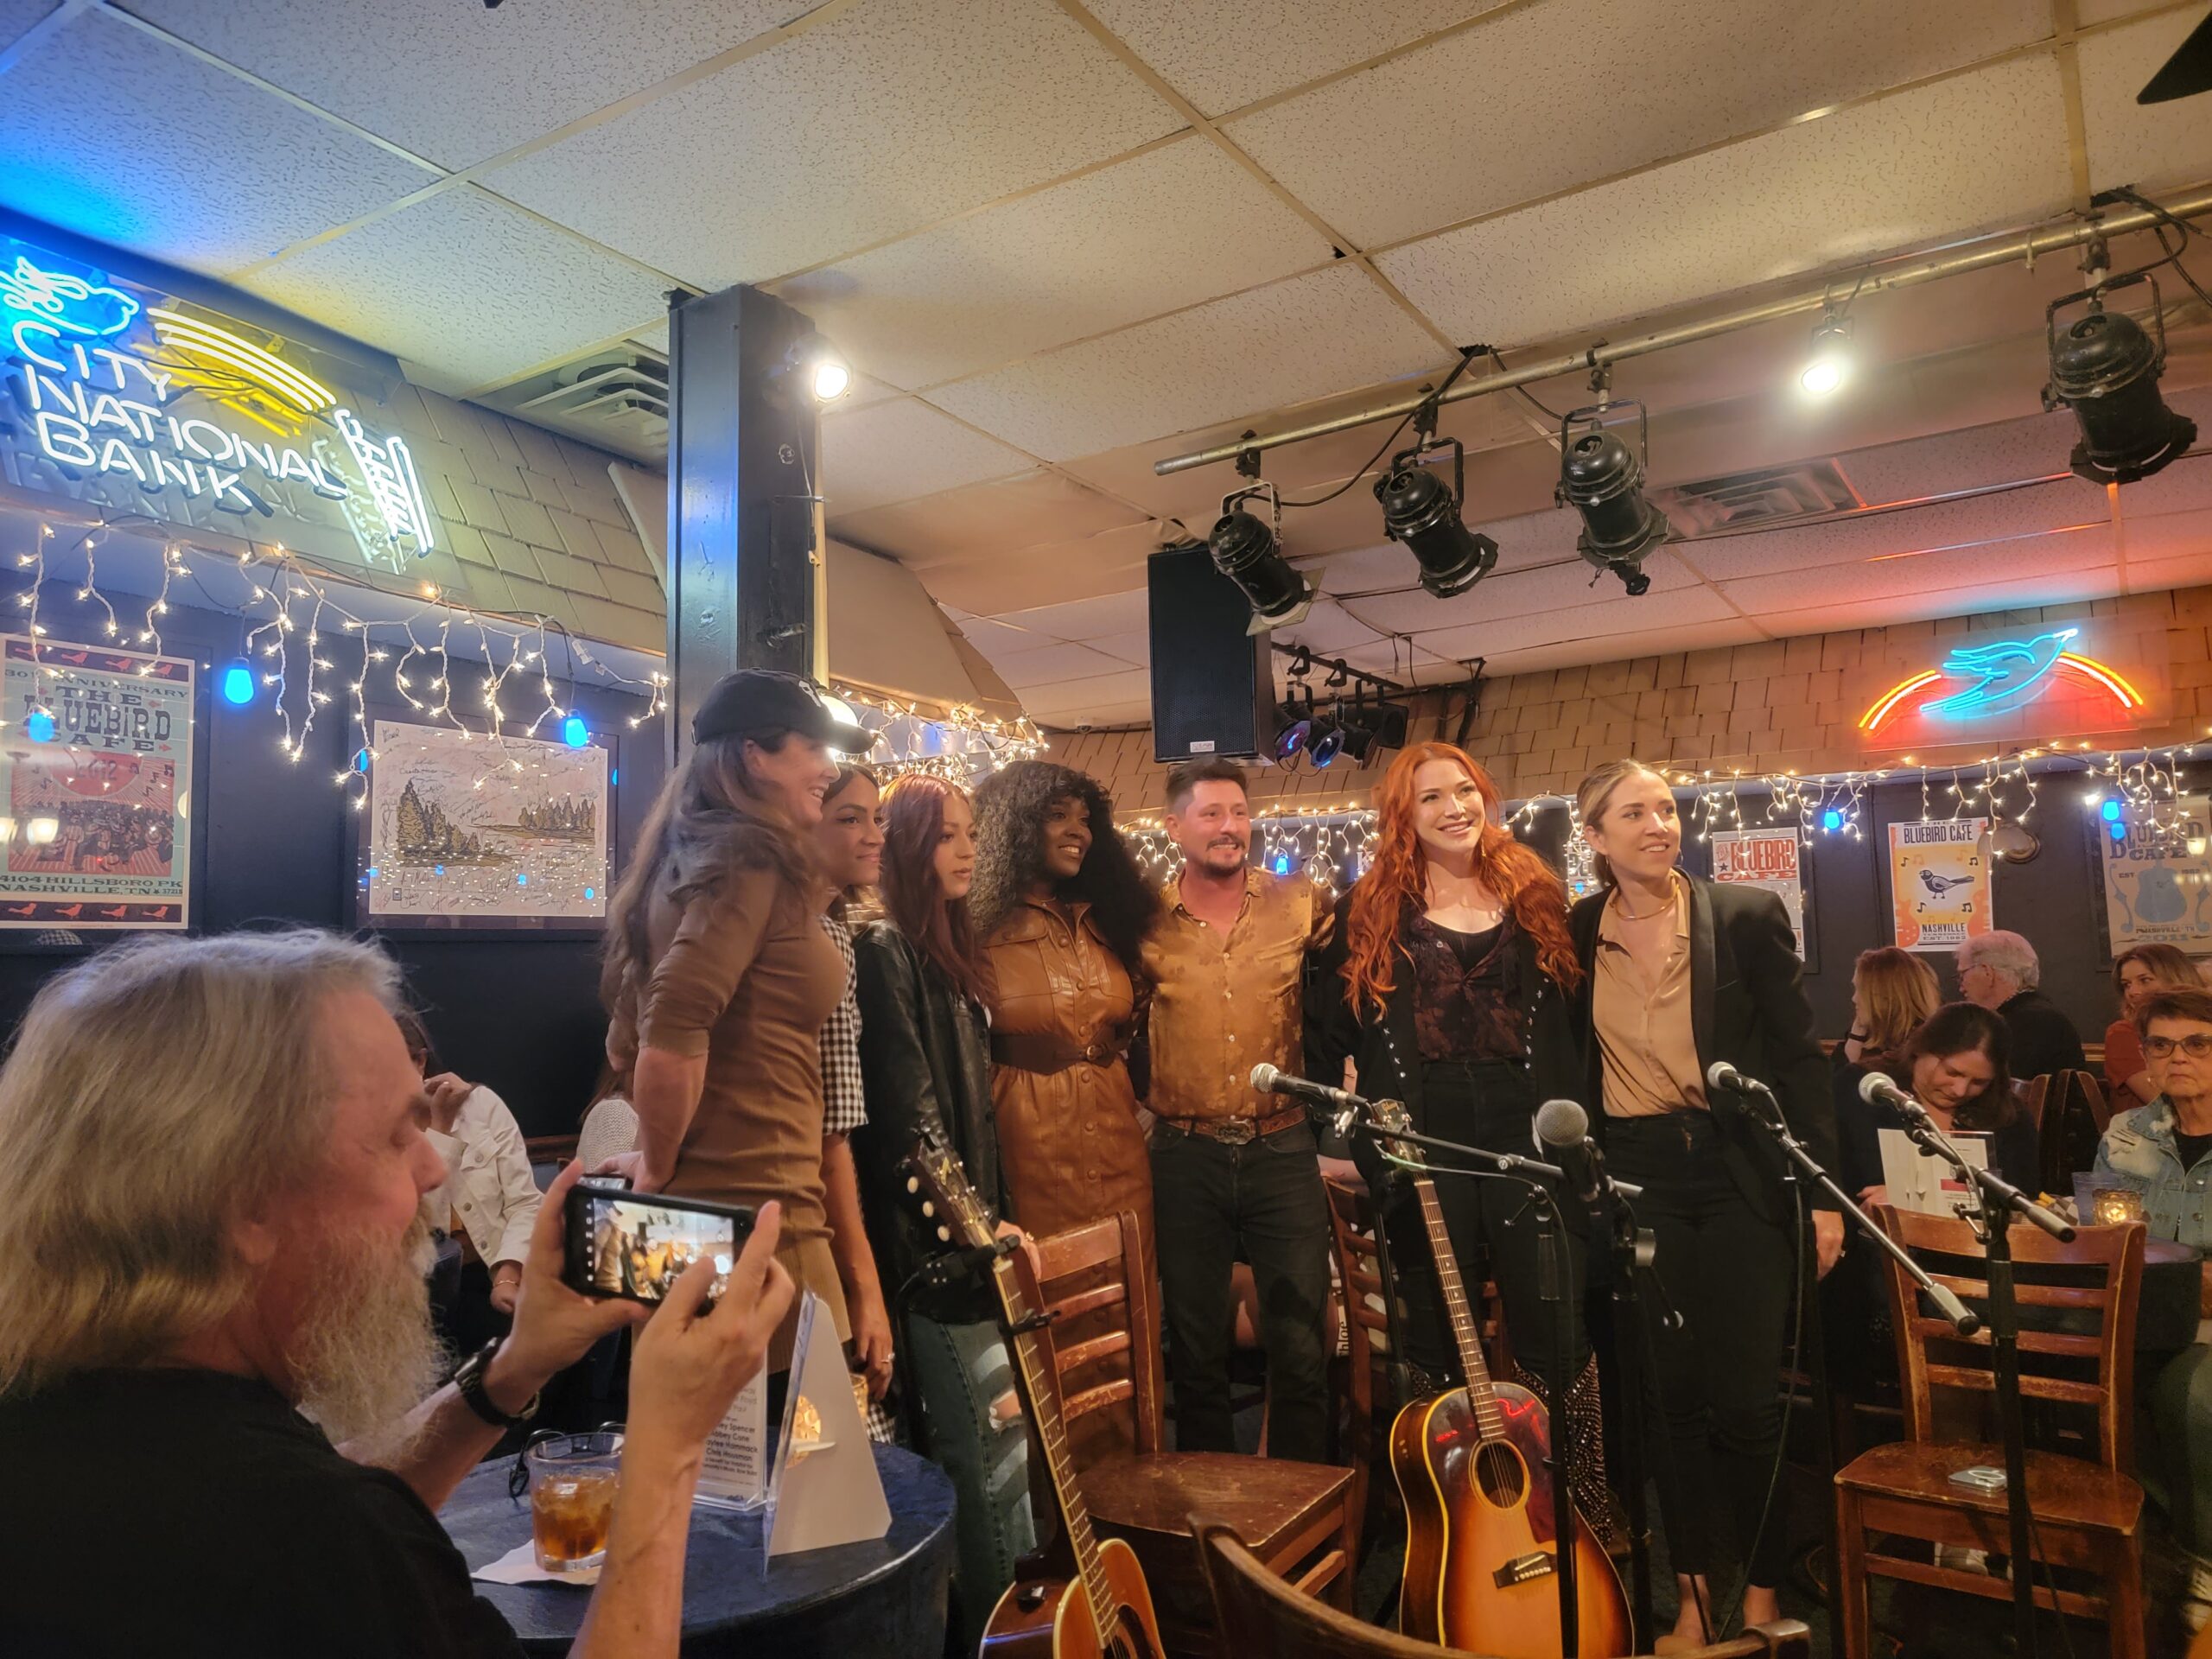 A group of musicions at the Bluebird cafe